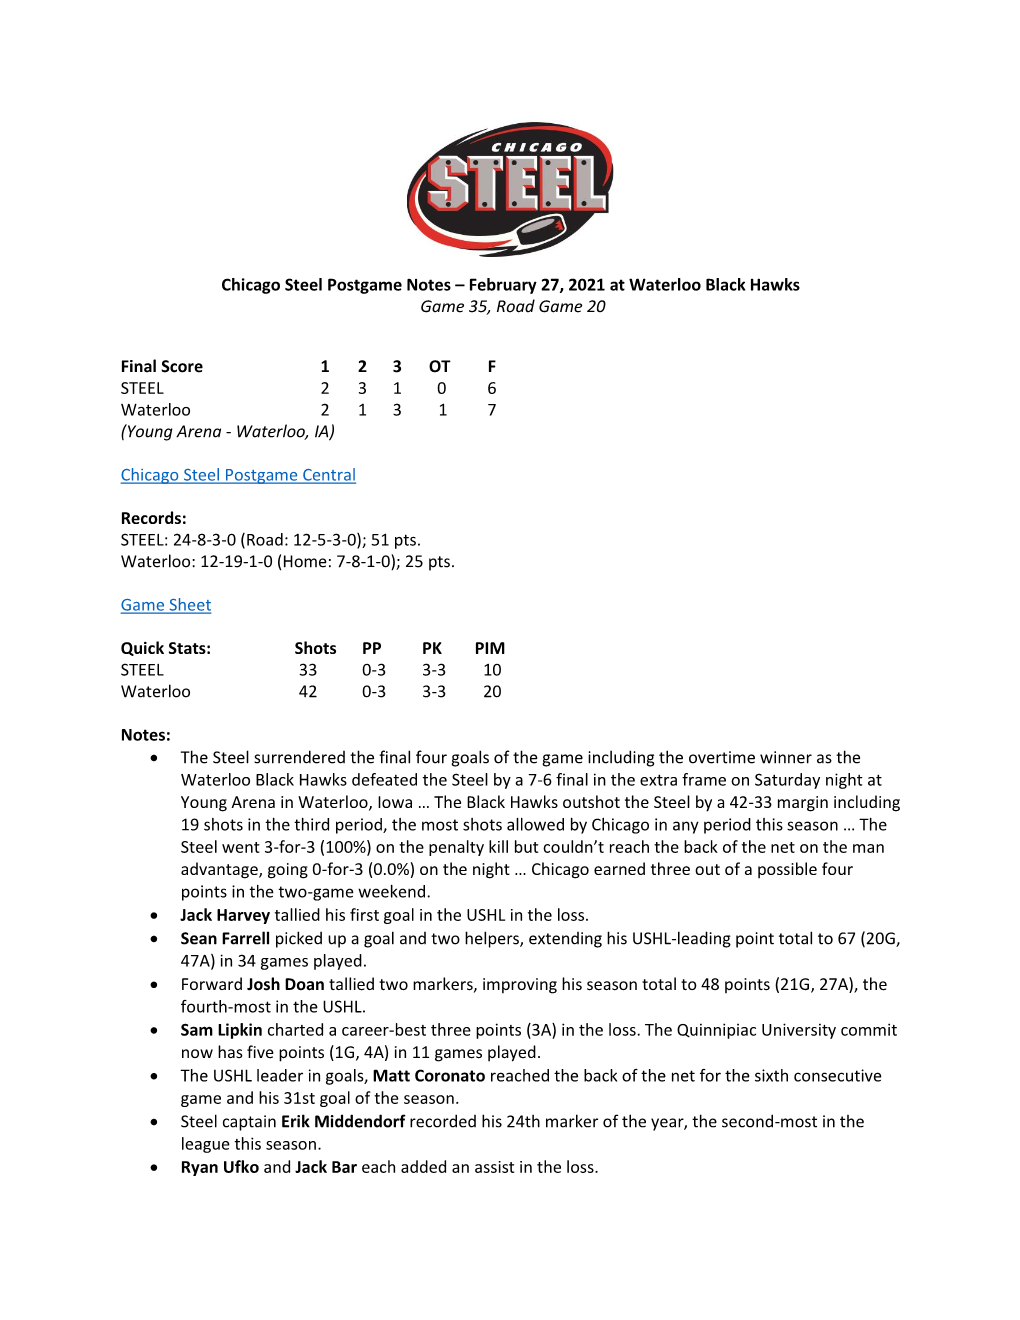 Chicago Steel Postgame Notes – February 27, 2021 at Waterloo Black Hawks Game 35, Road Game 20